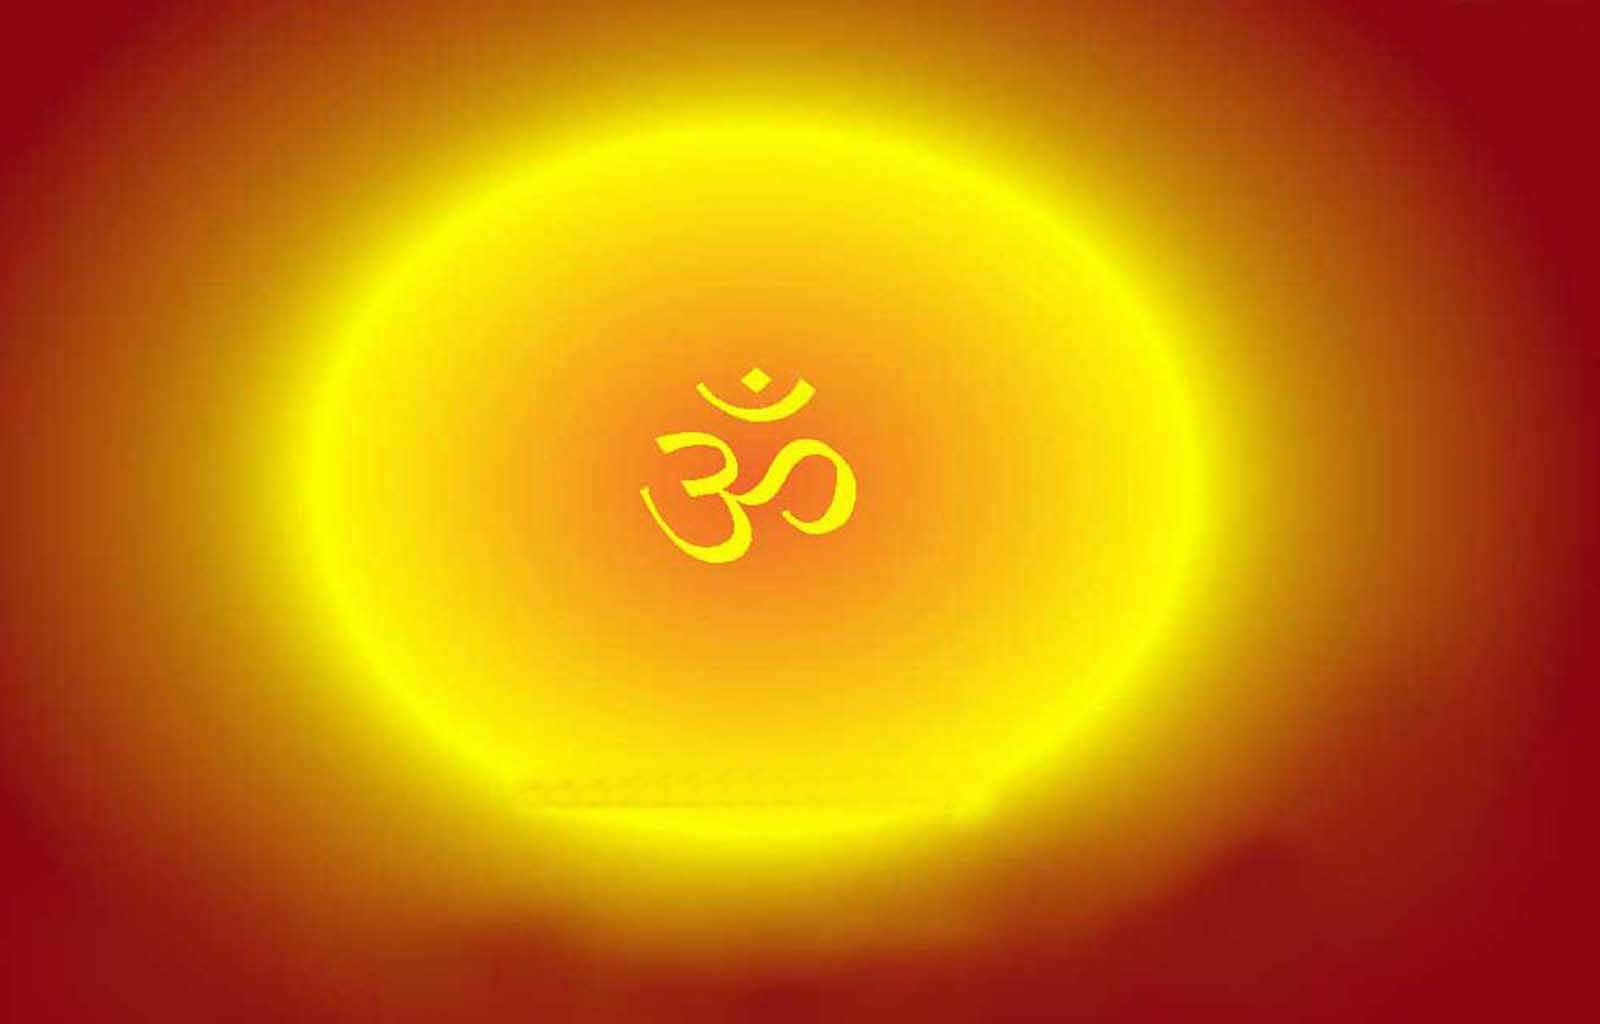 om hd wallpapers for facebook wishes hindu om wallpapers download 1600x1024